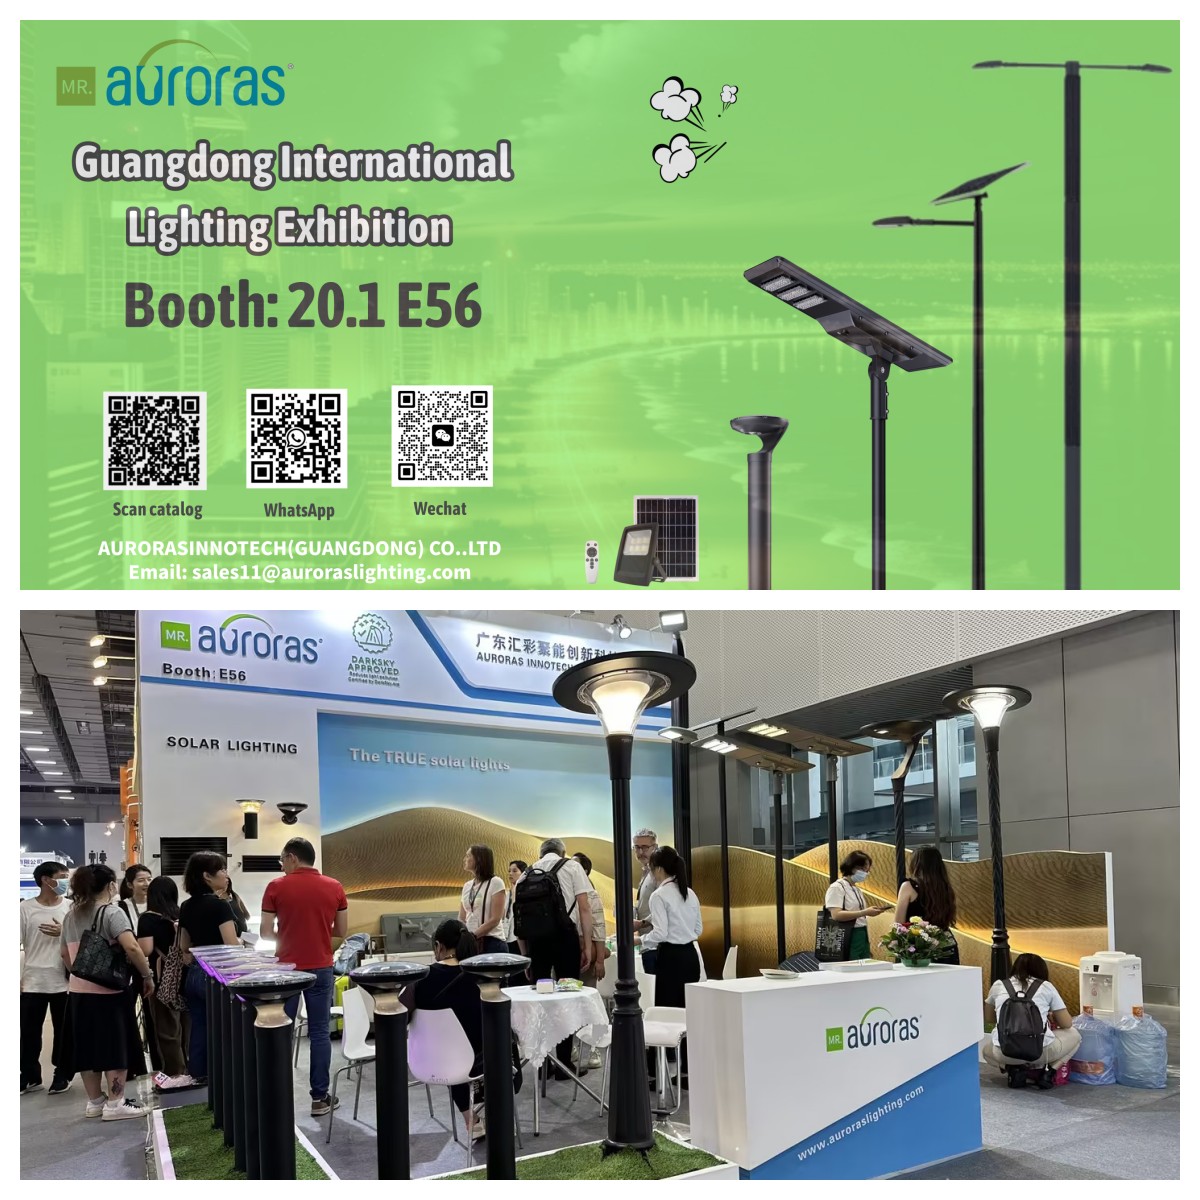 Auroras--Guangzhou International Lighting Exhibition
Waiting for meeting you here 📷
Booth : 20.1 E56
Contact me if you need catalog
#solar #solarlight #fair #exhibition #guangzhou #guangzhoufair #lighting #lightingfair